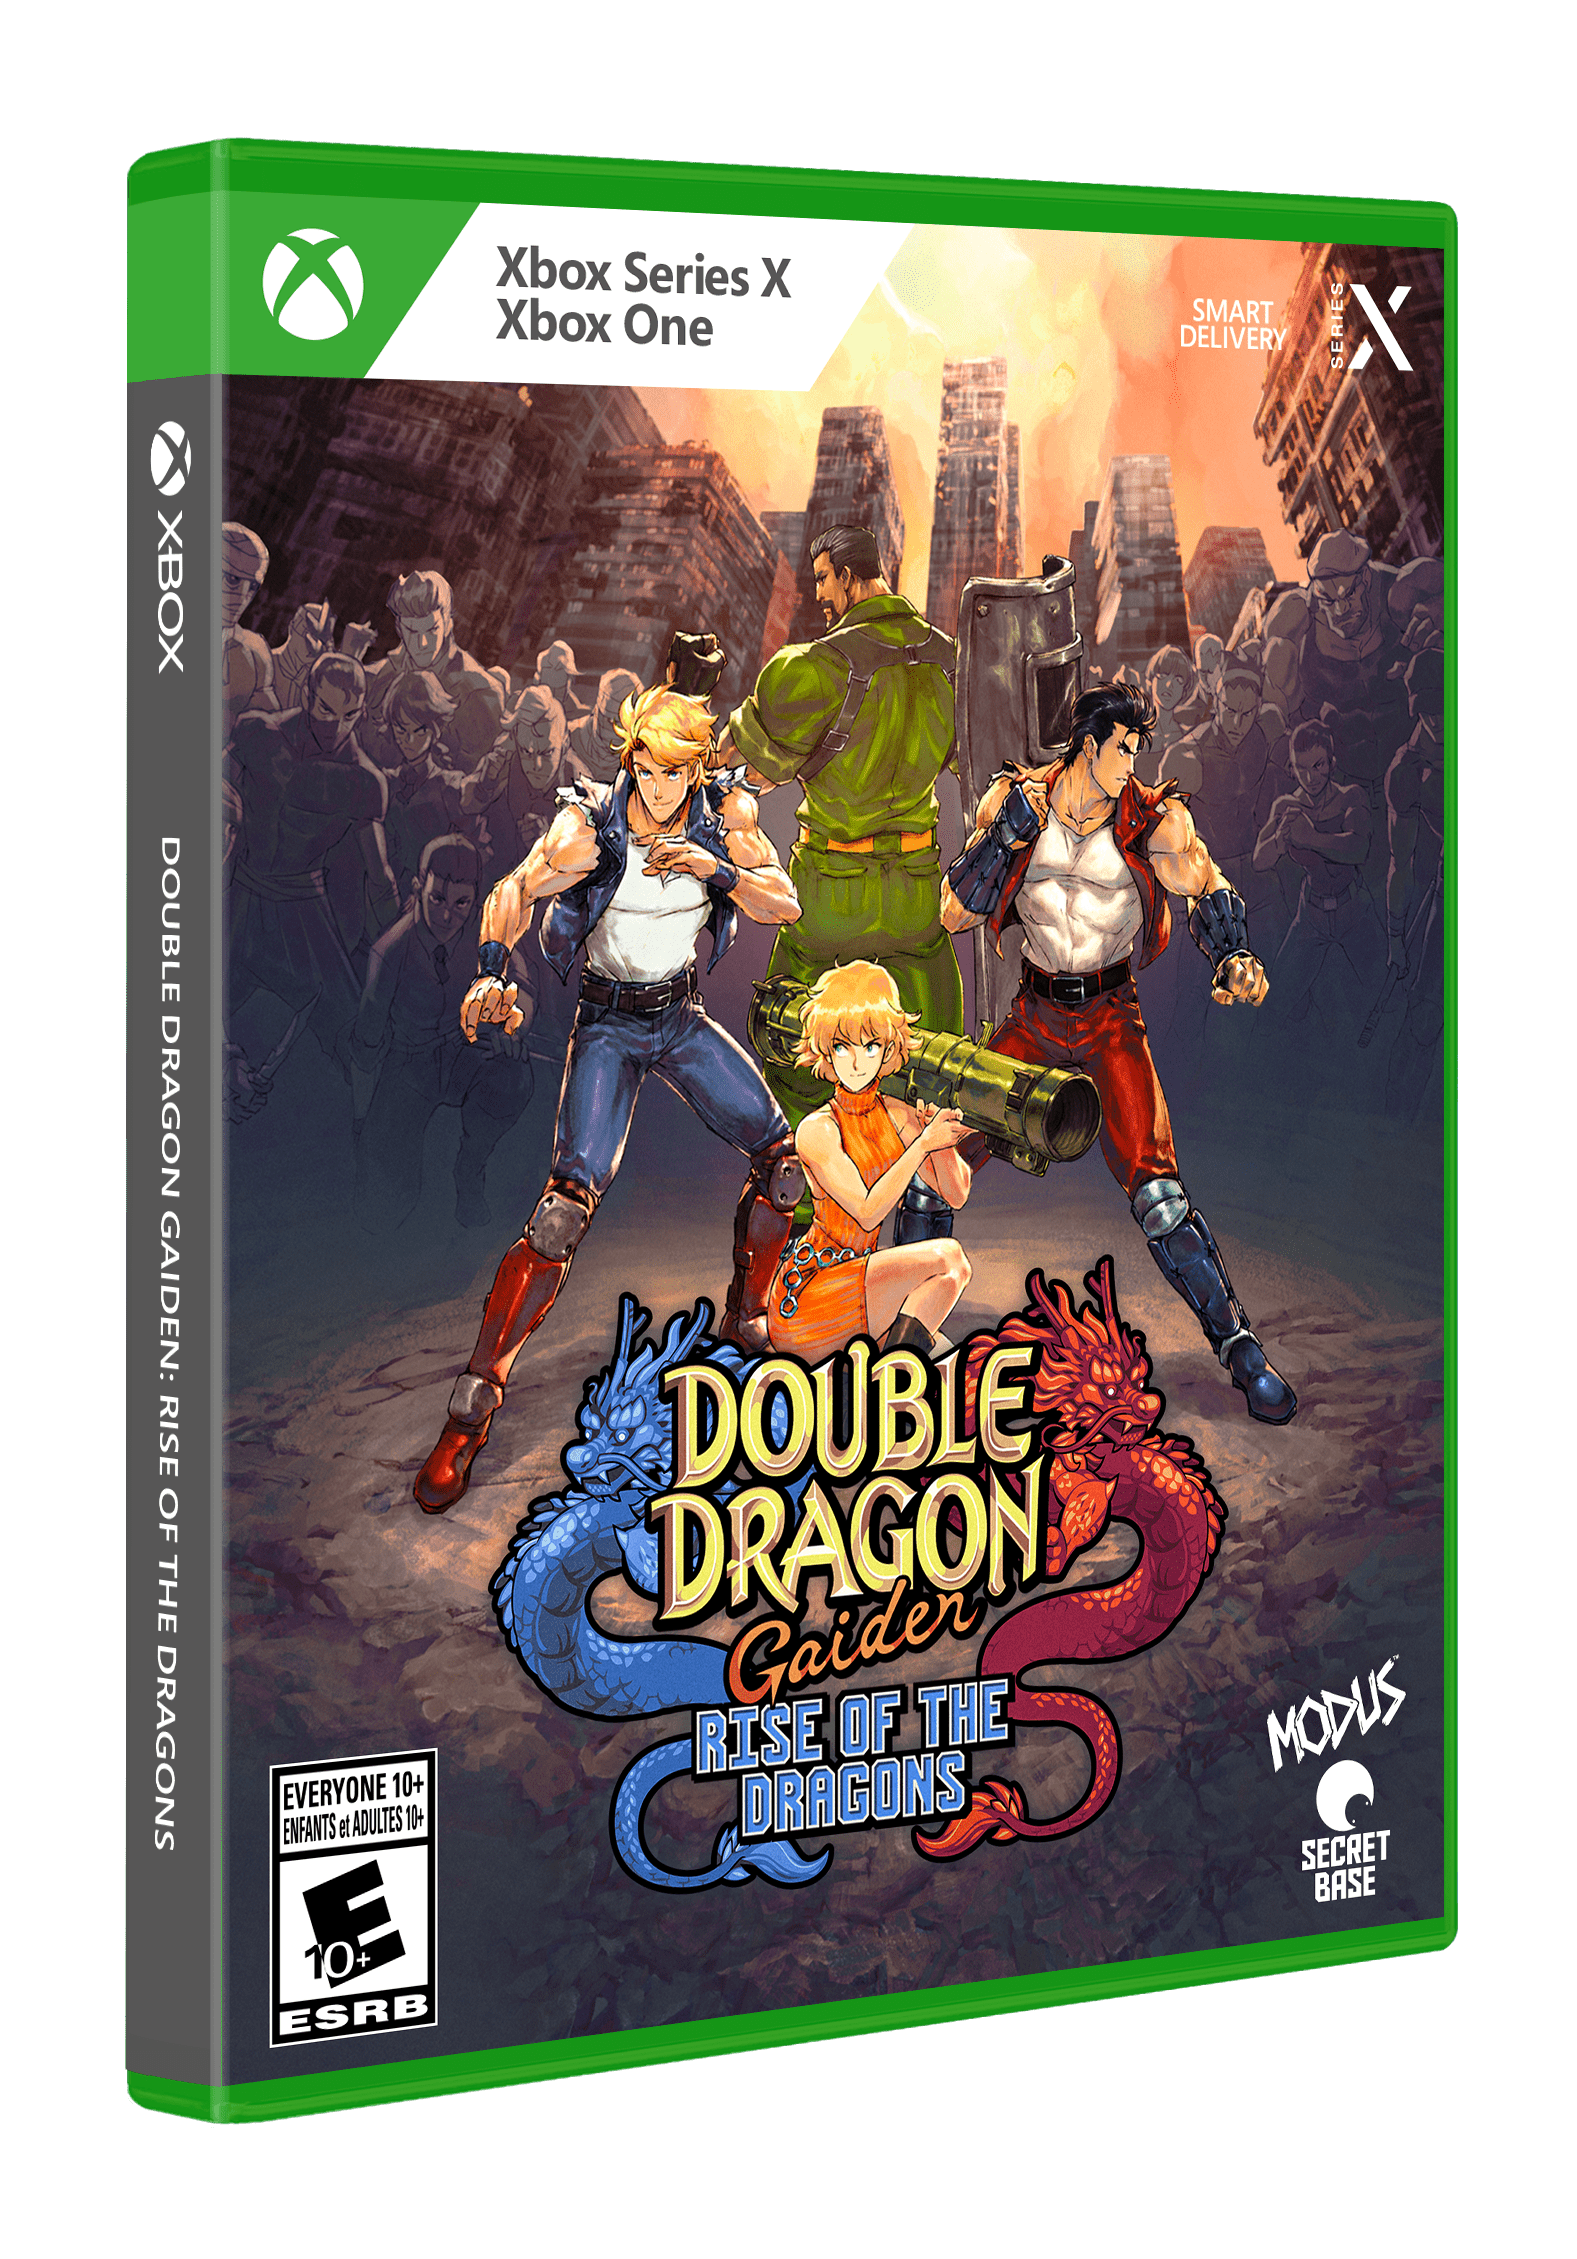 Double Dragon Gaiden: Rise of the Dragons out this summer